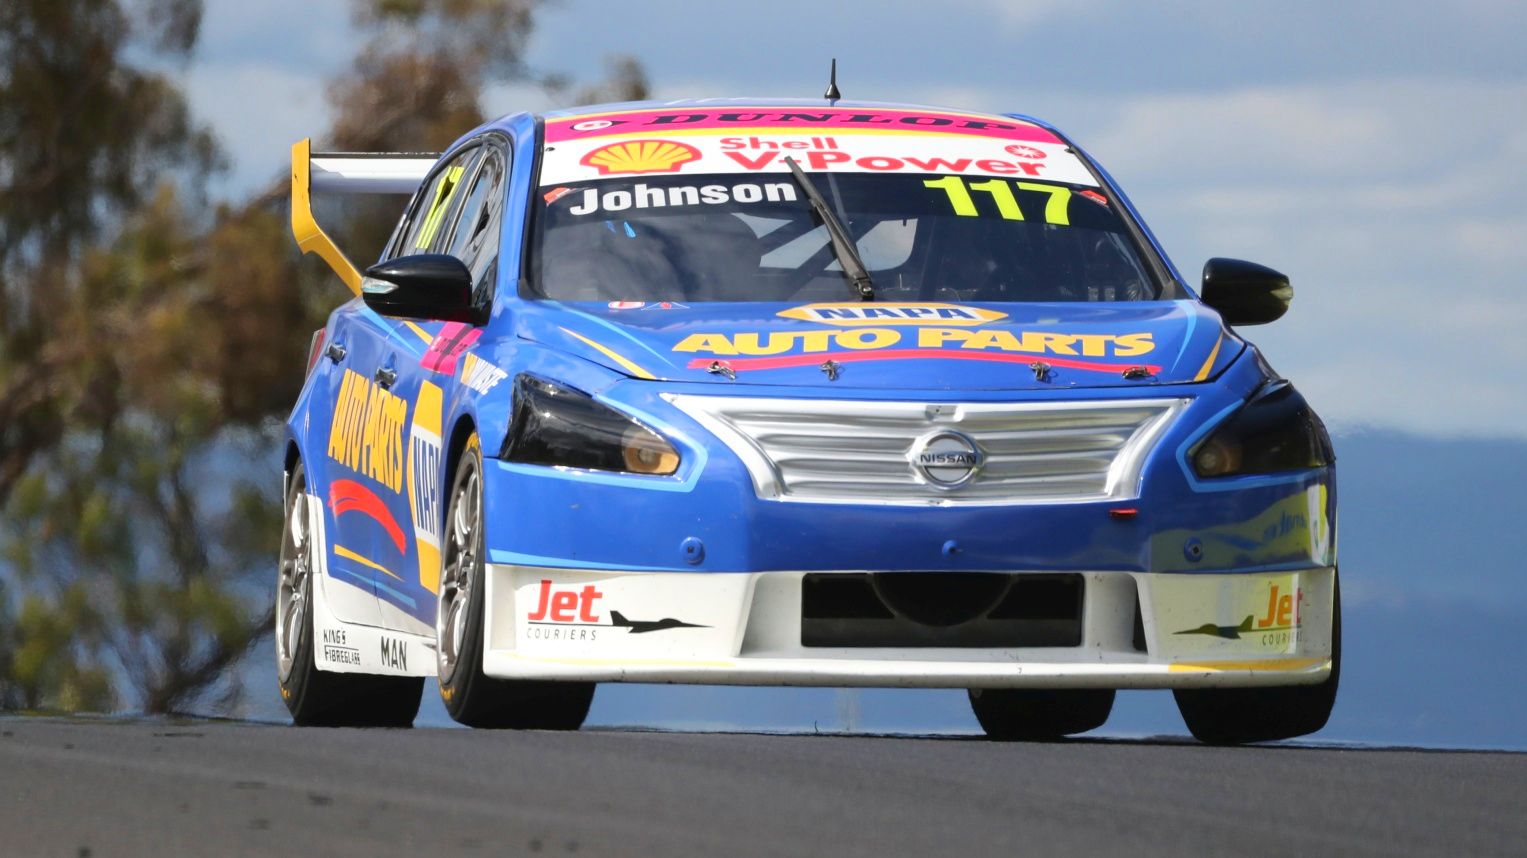 Jett Johnson is racing a Nissan Altima in the Super3 class of the Dunlop Series.